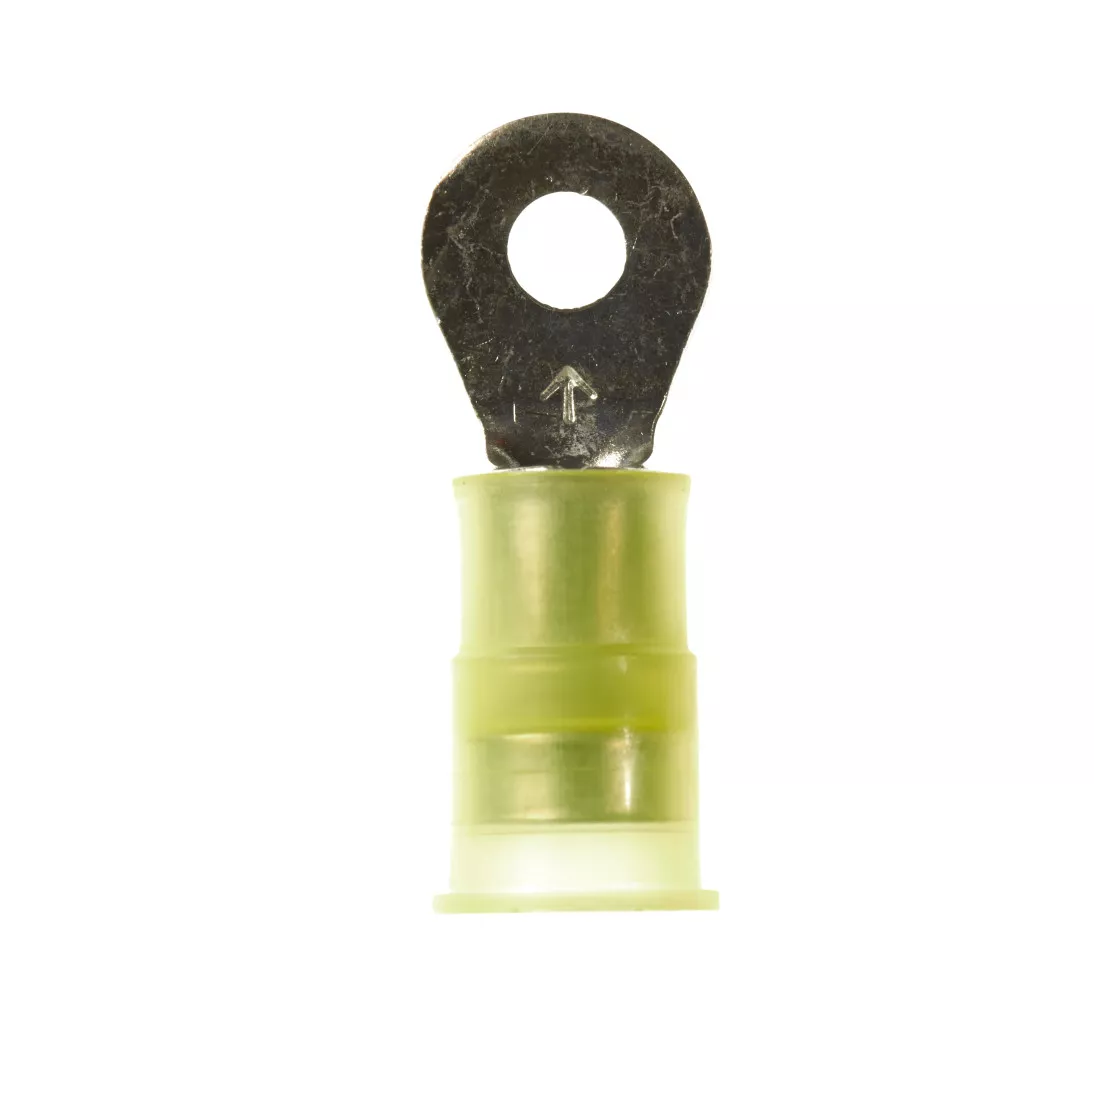 3M™ Scotchlok™ Ring Tongue, Nylon Insulated w/Insulation Grip MNG10-6RK,
Stud Size 6, 500/Case